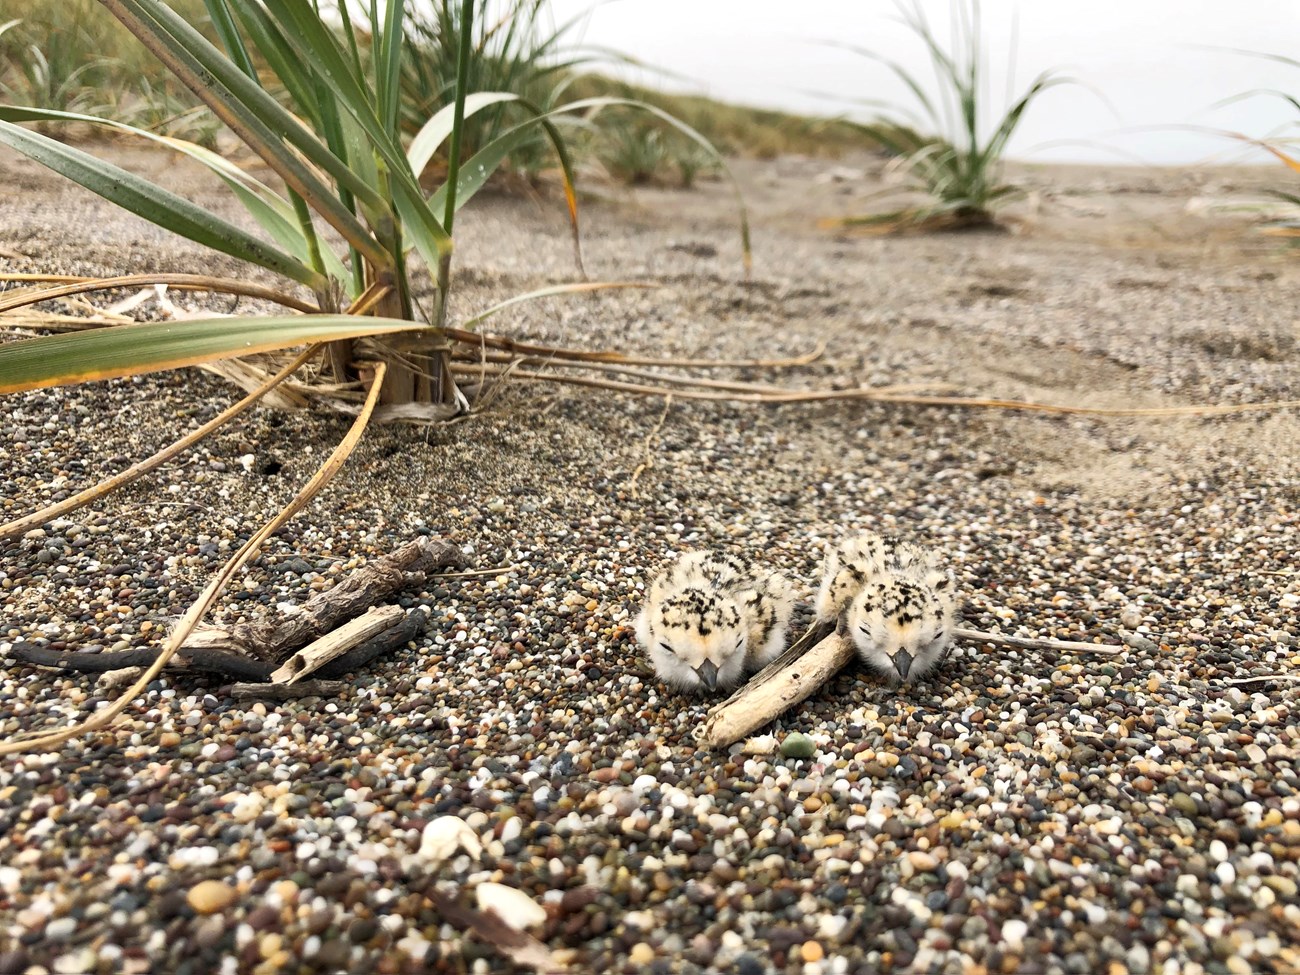 Two tiny, sand-colored plover chicks doze beside a clump of American beachgrass.